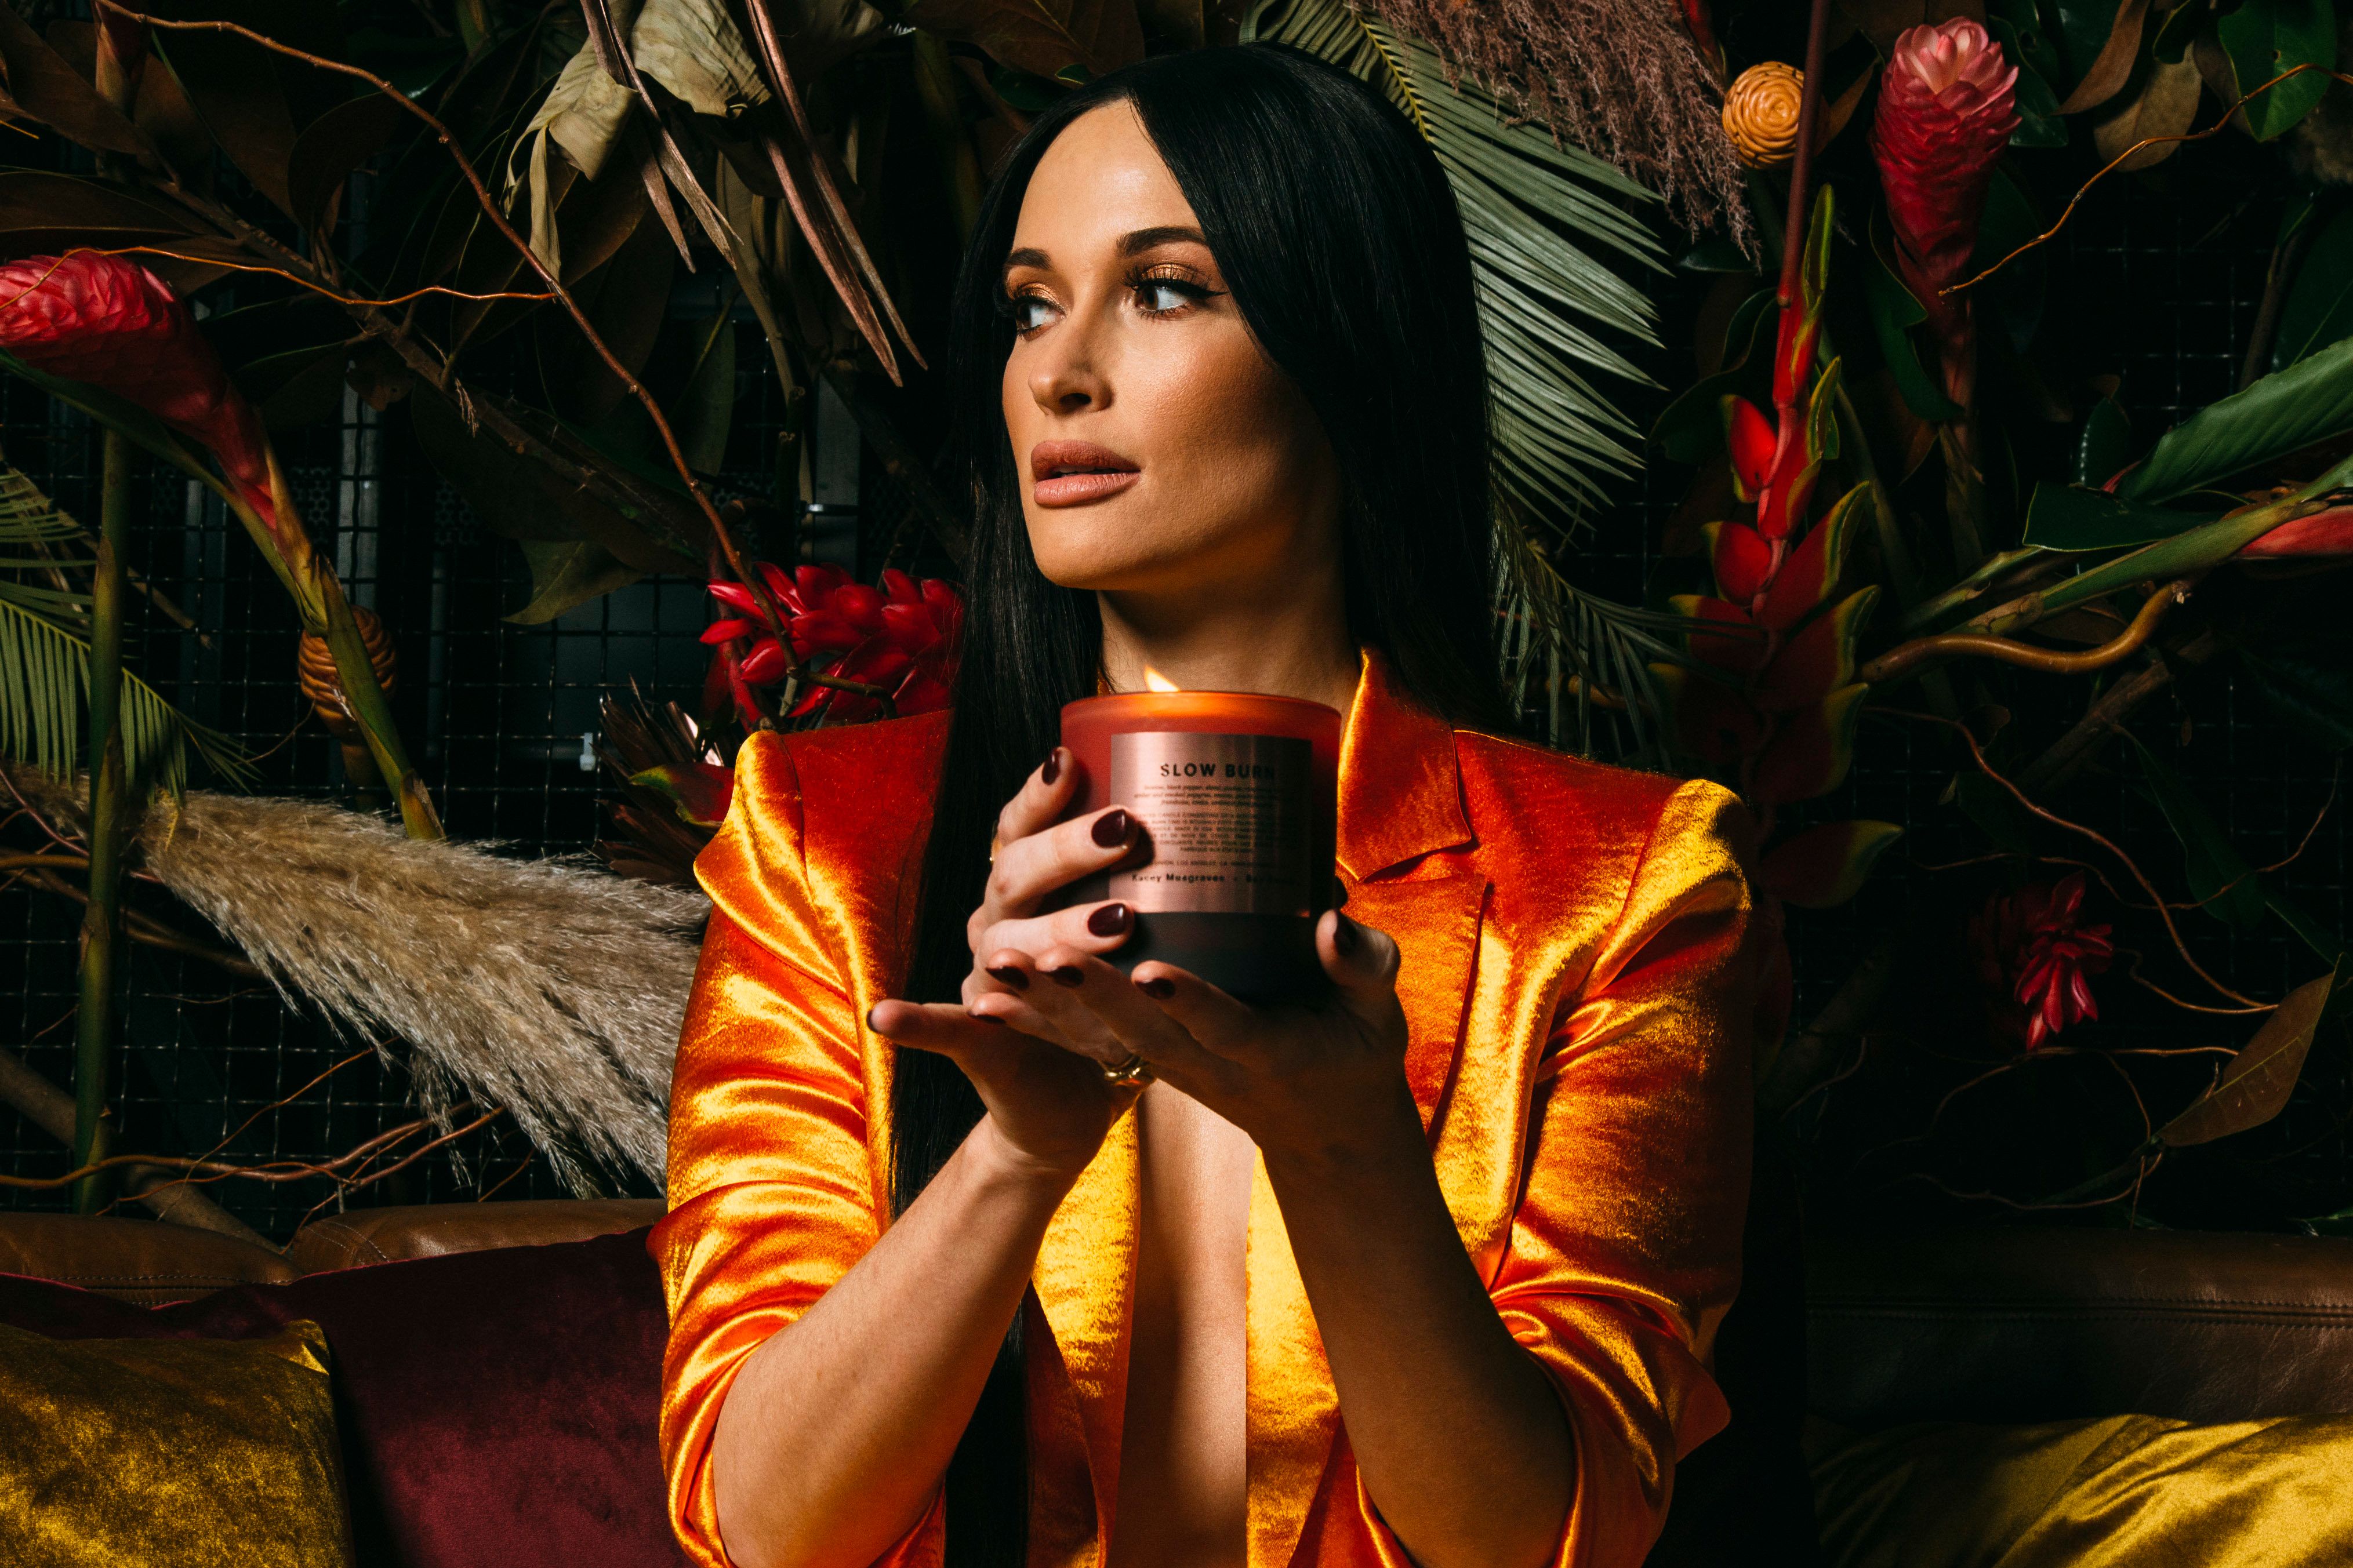 kacey musgraves slow burn candle